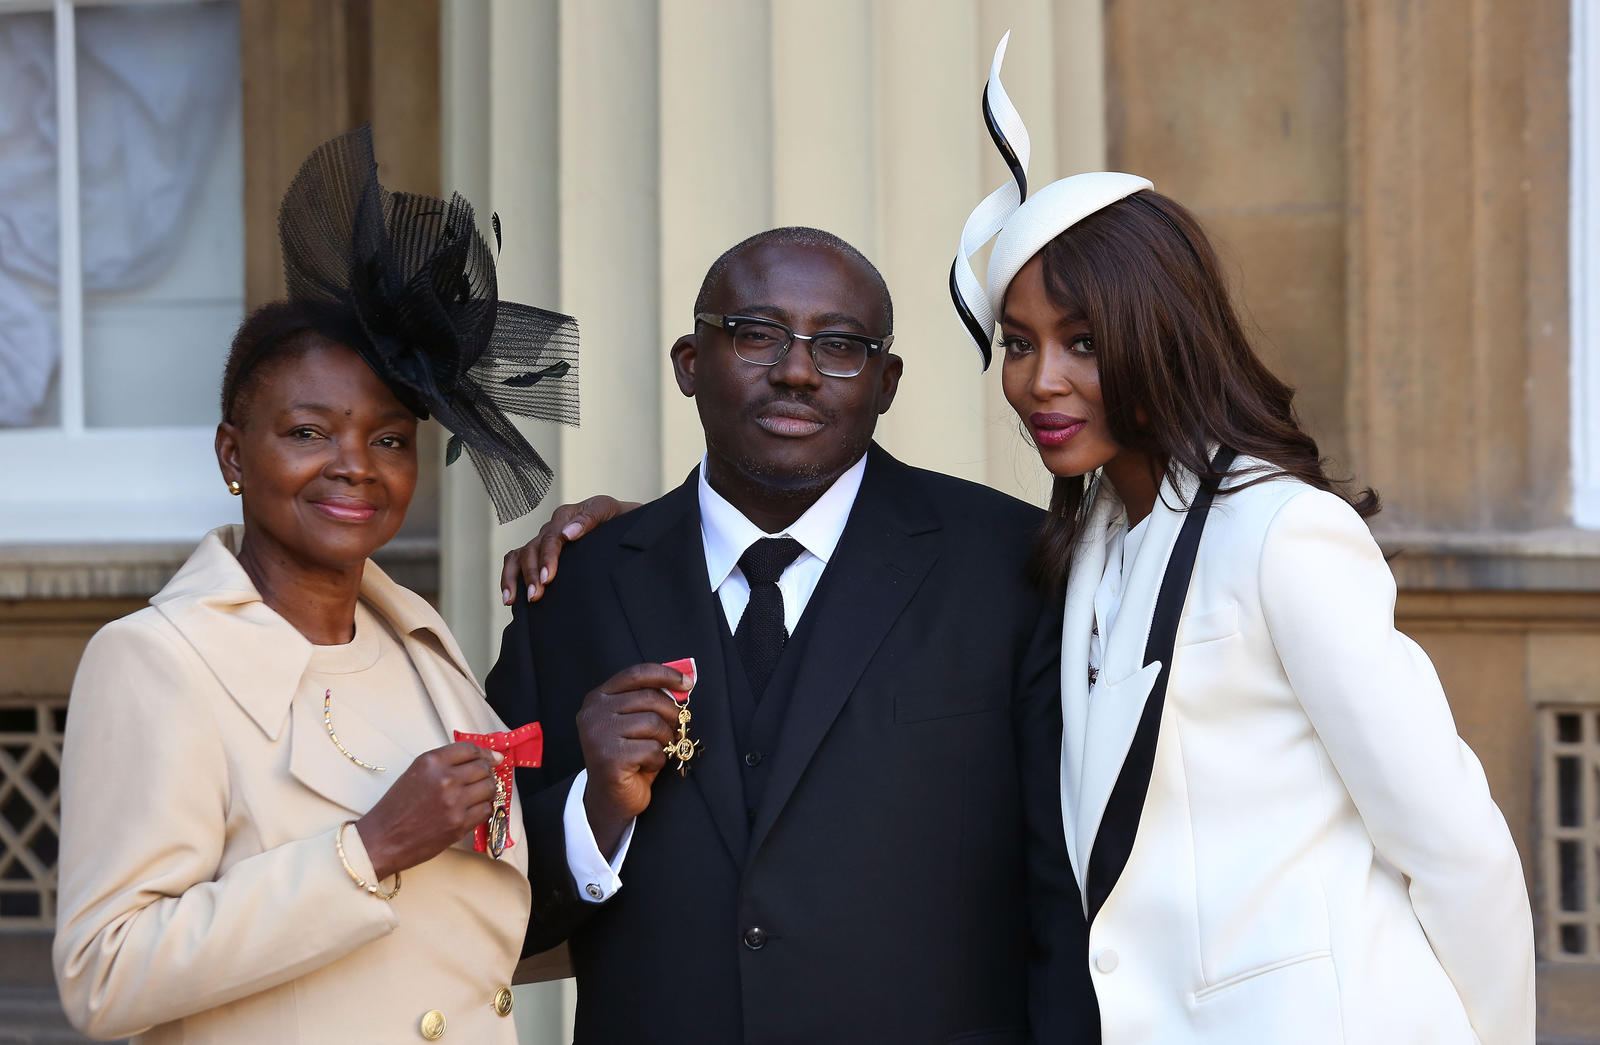 Model Naomi Campbell poses for a photograph with Baroness Amos and fashion stylist Edward Enninful, at Buckingham Palace in London